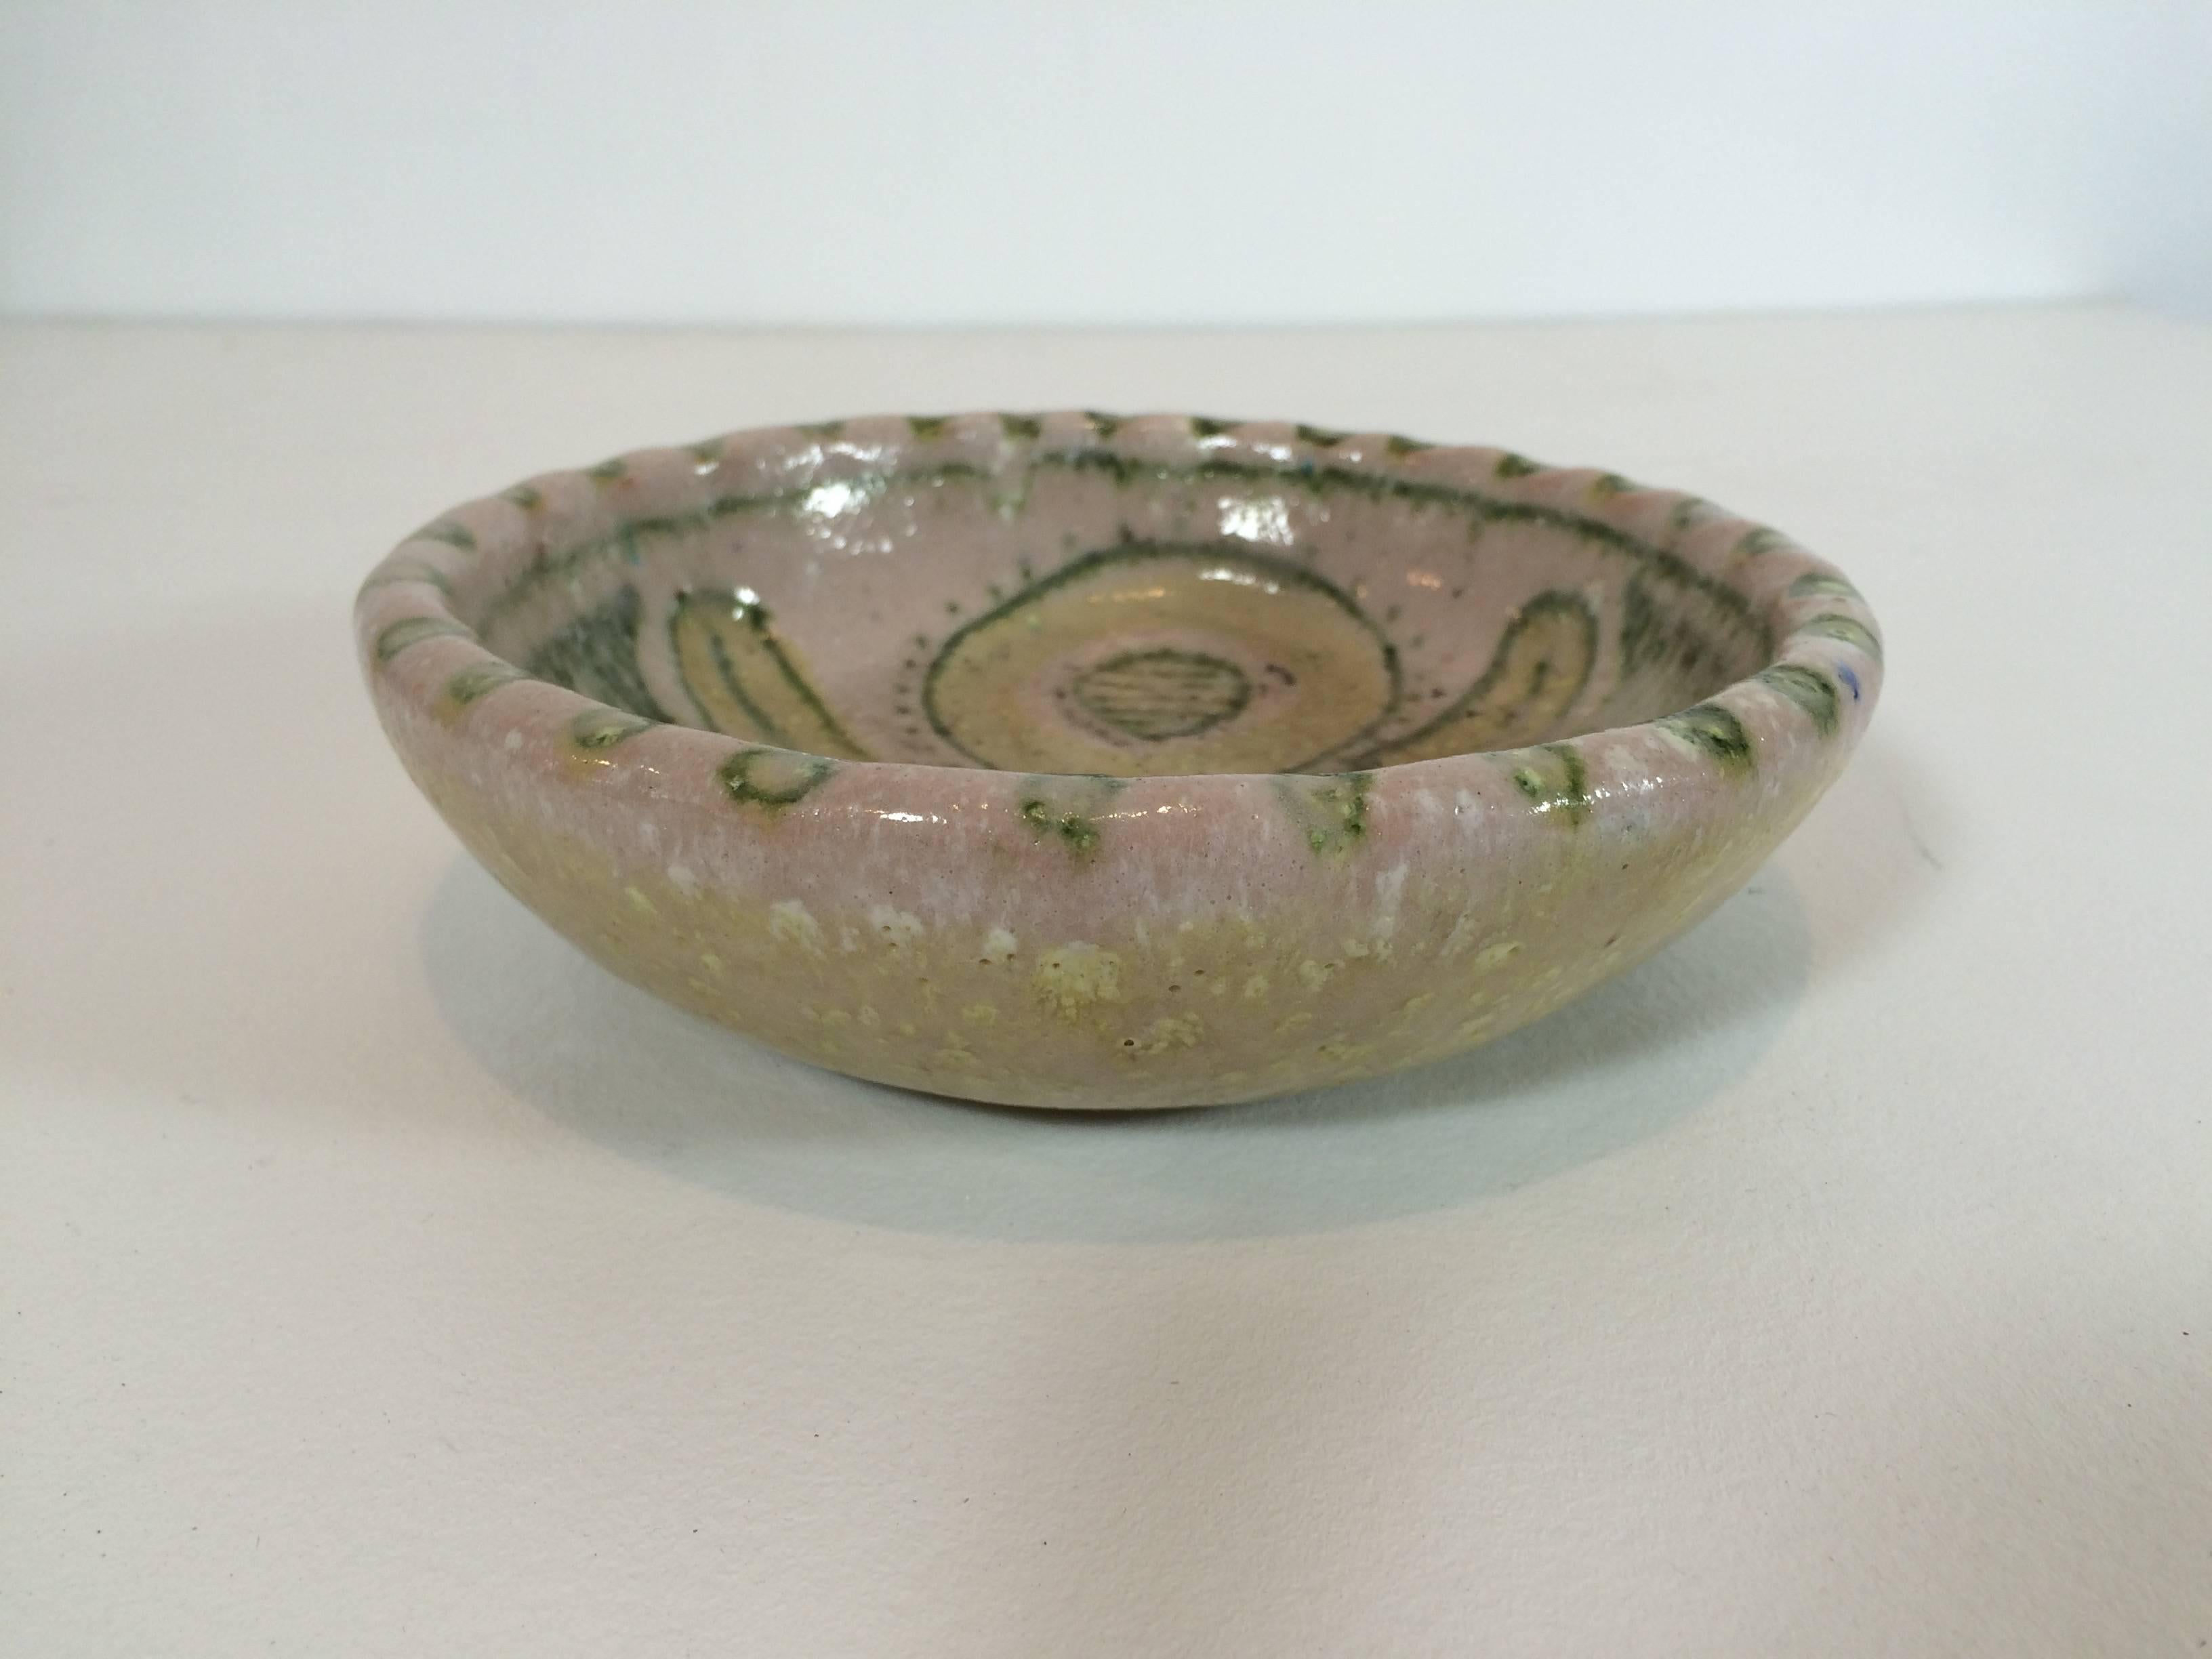 Handmade 1960s Gambone bowl with donkey marking on back, indicating Guido's hand created the piece. 

Gambone was an modern ceramic artist of the 1950s and 1960s whose work has become a favourite for collectors due to his playful use of shapes and